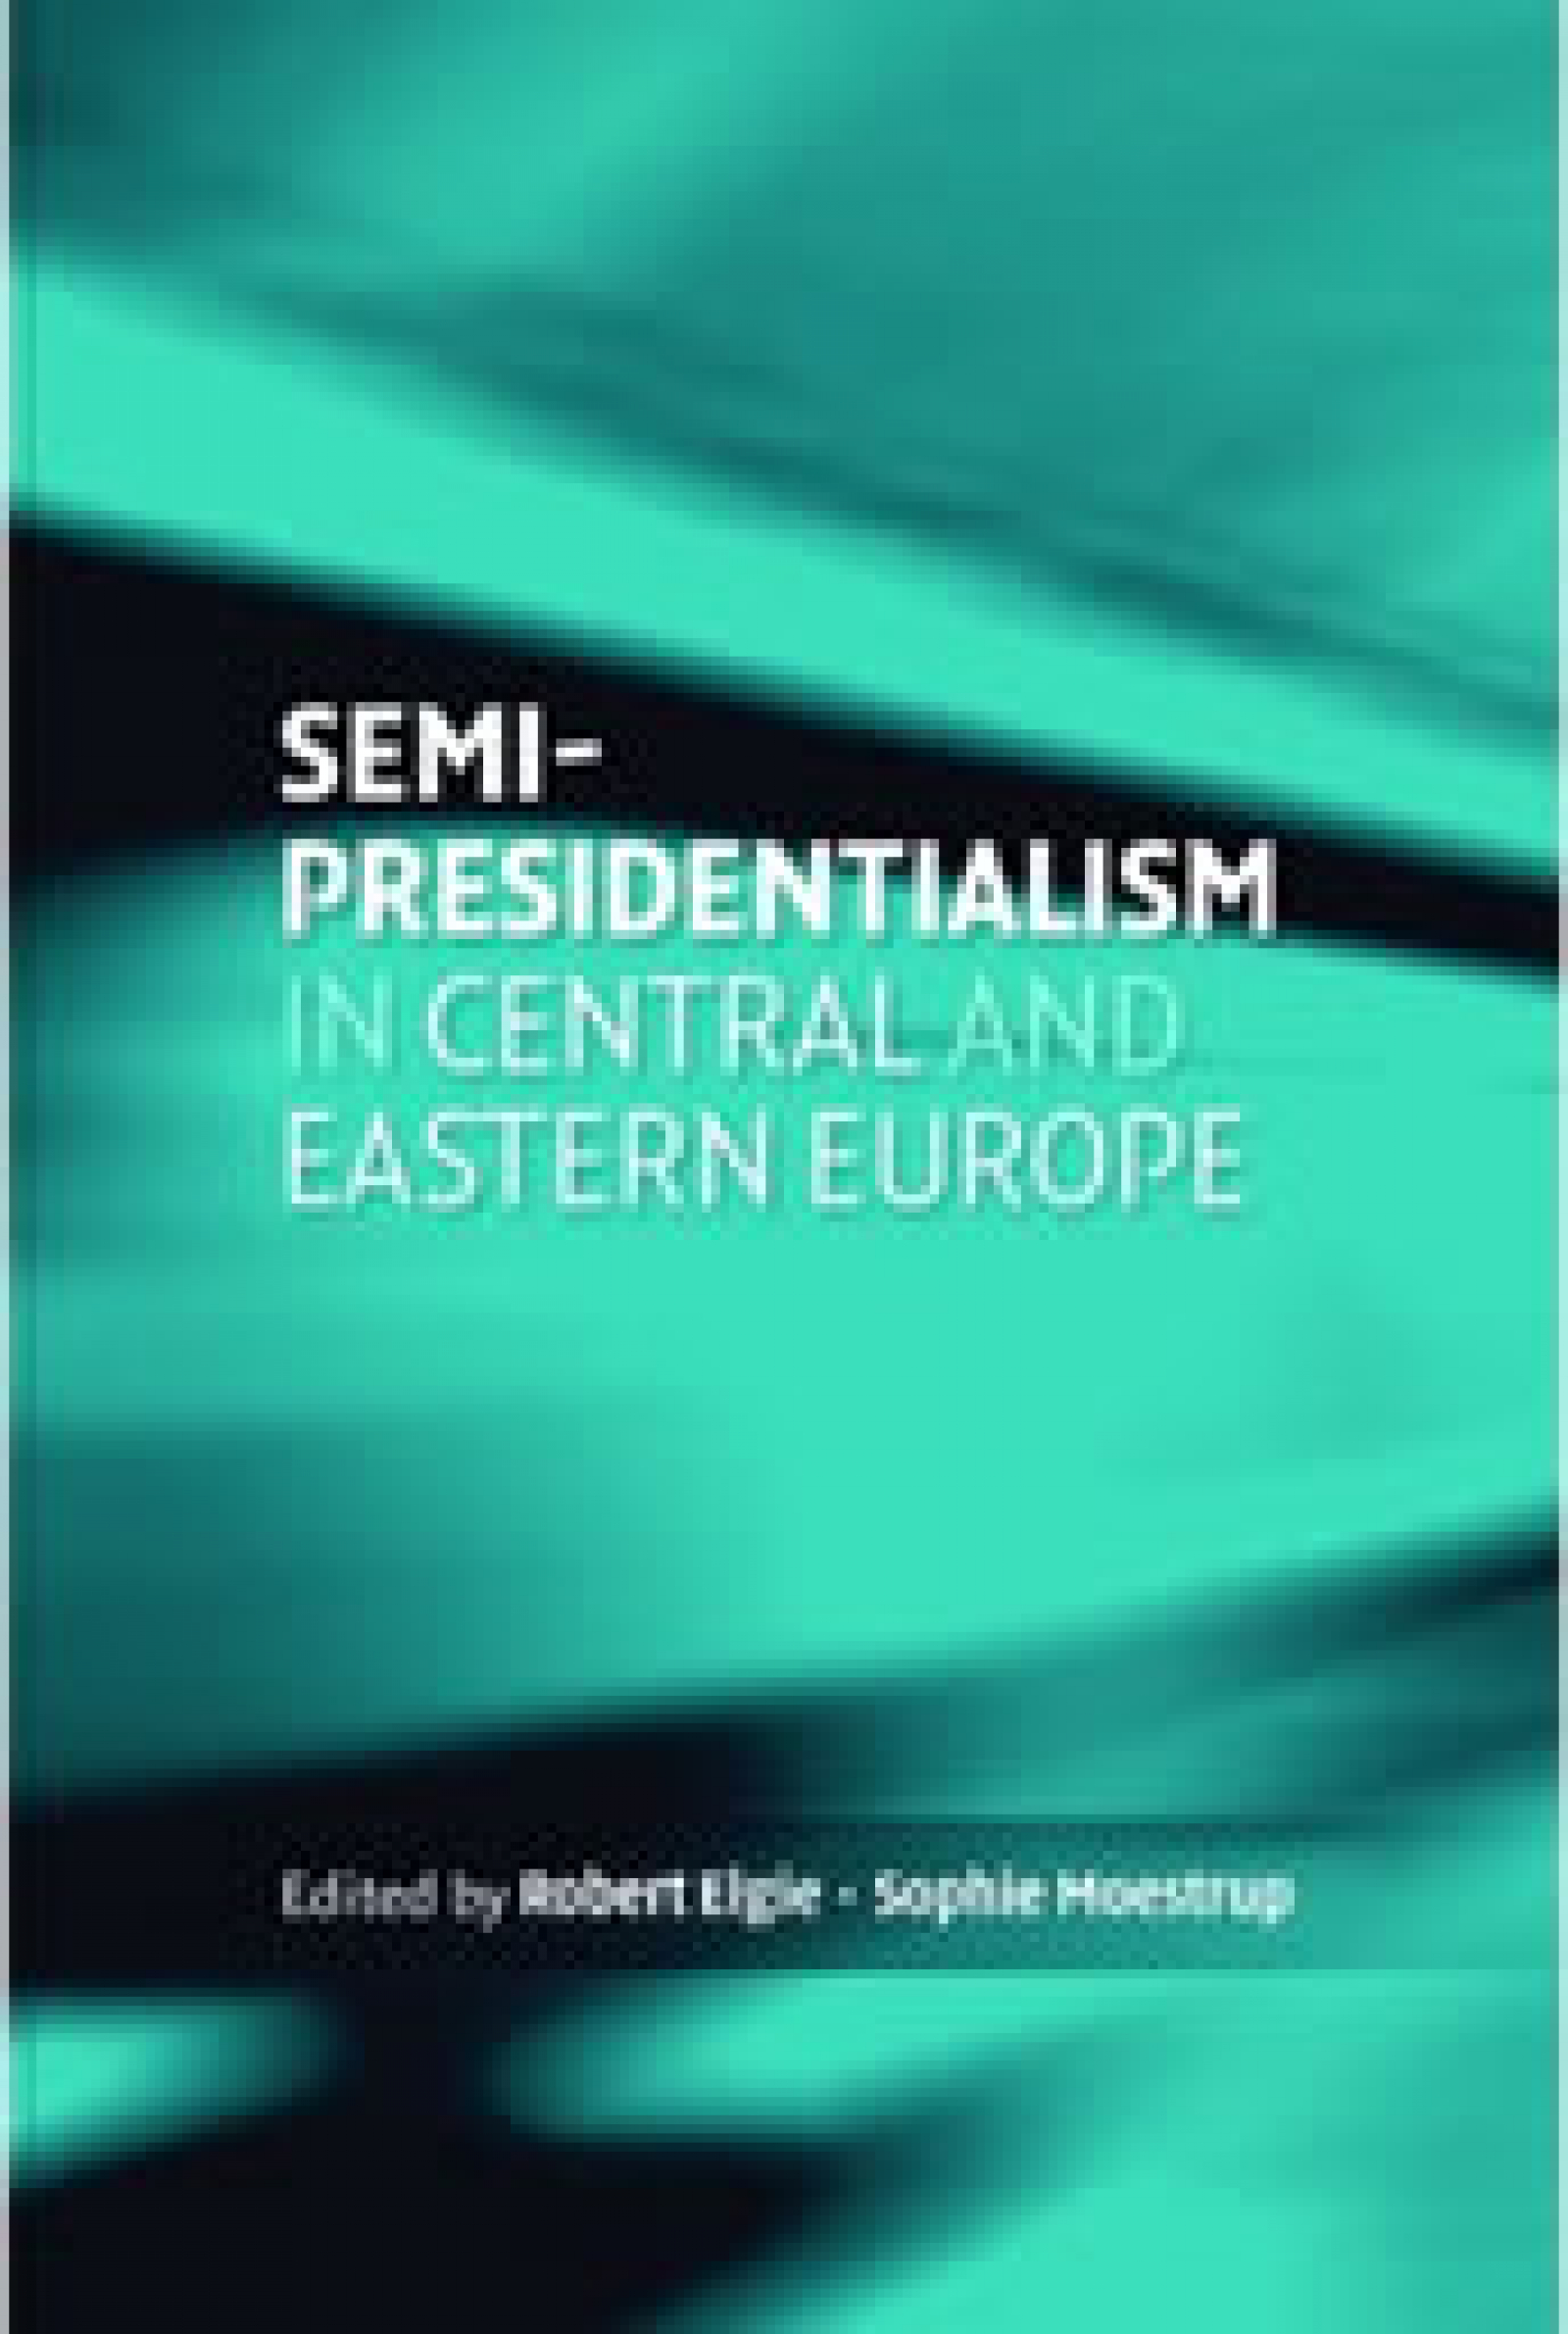 NDI Expert Explores “Semi-Presidentialism” in Central and Eastern Europe